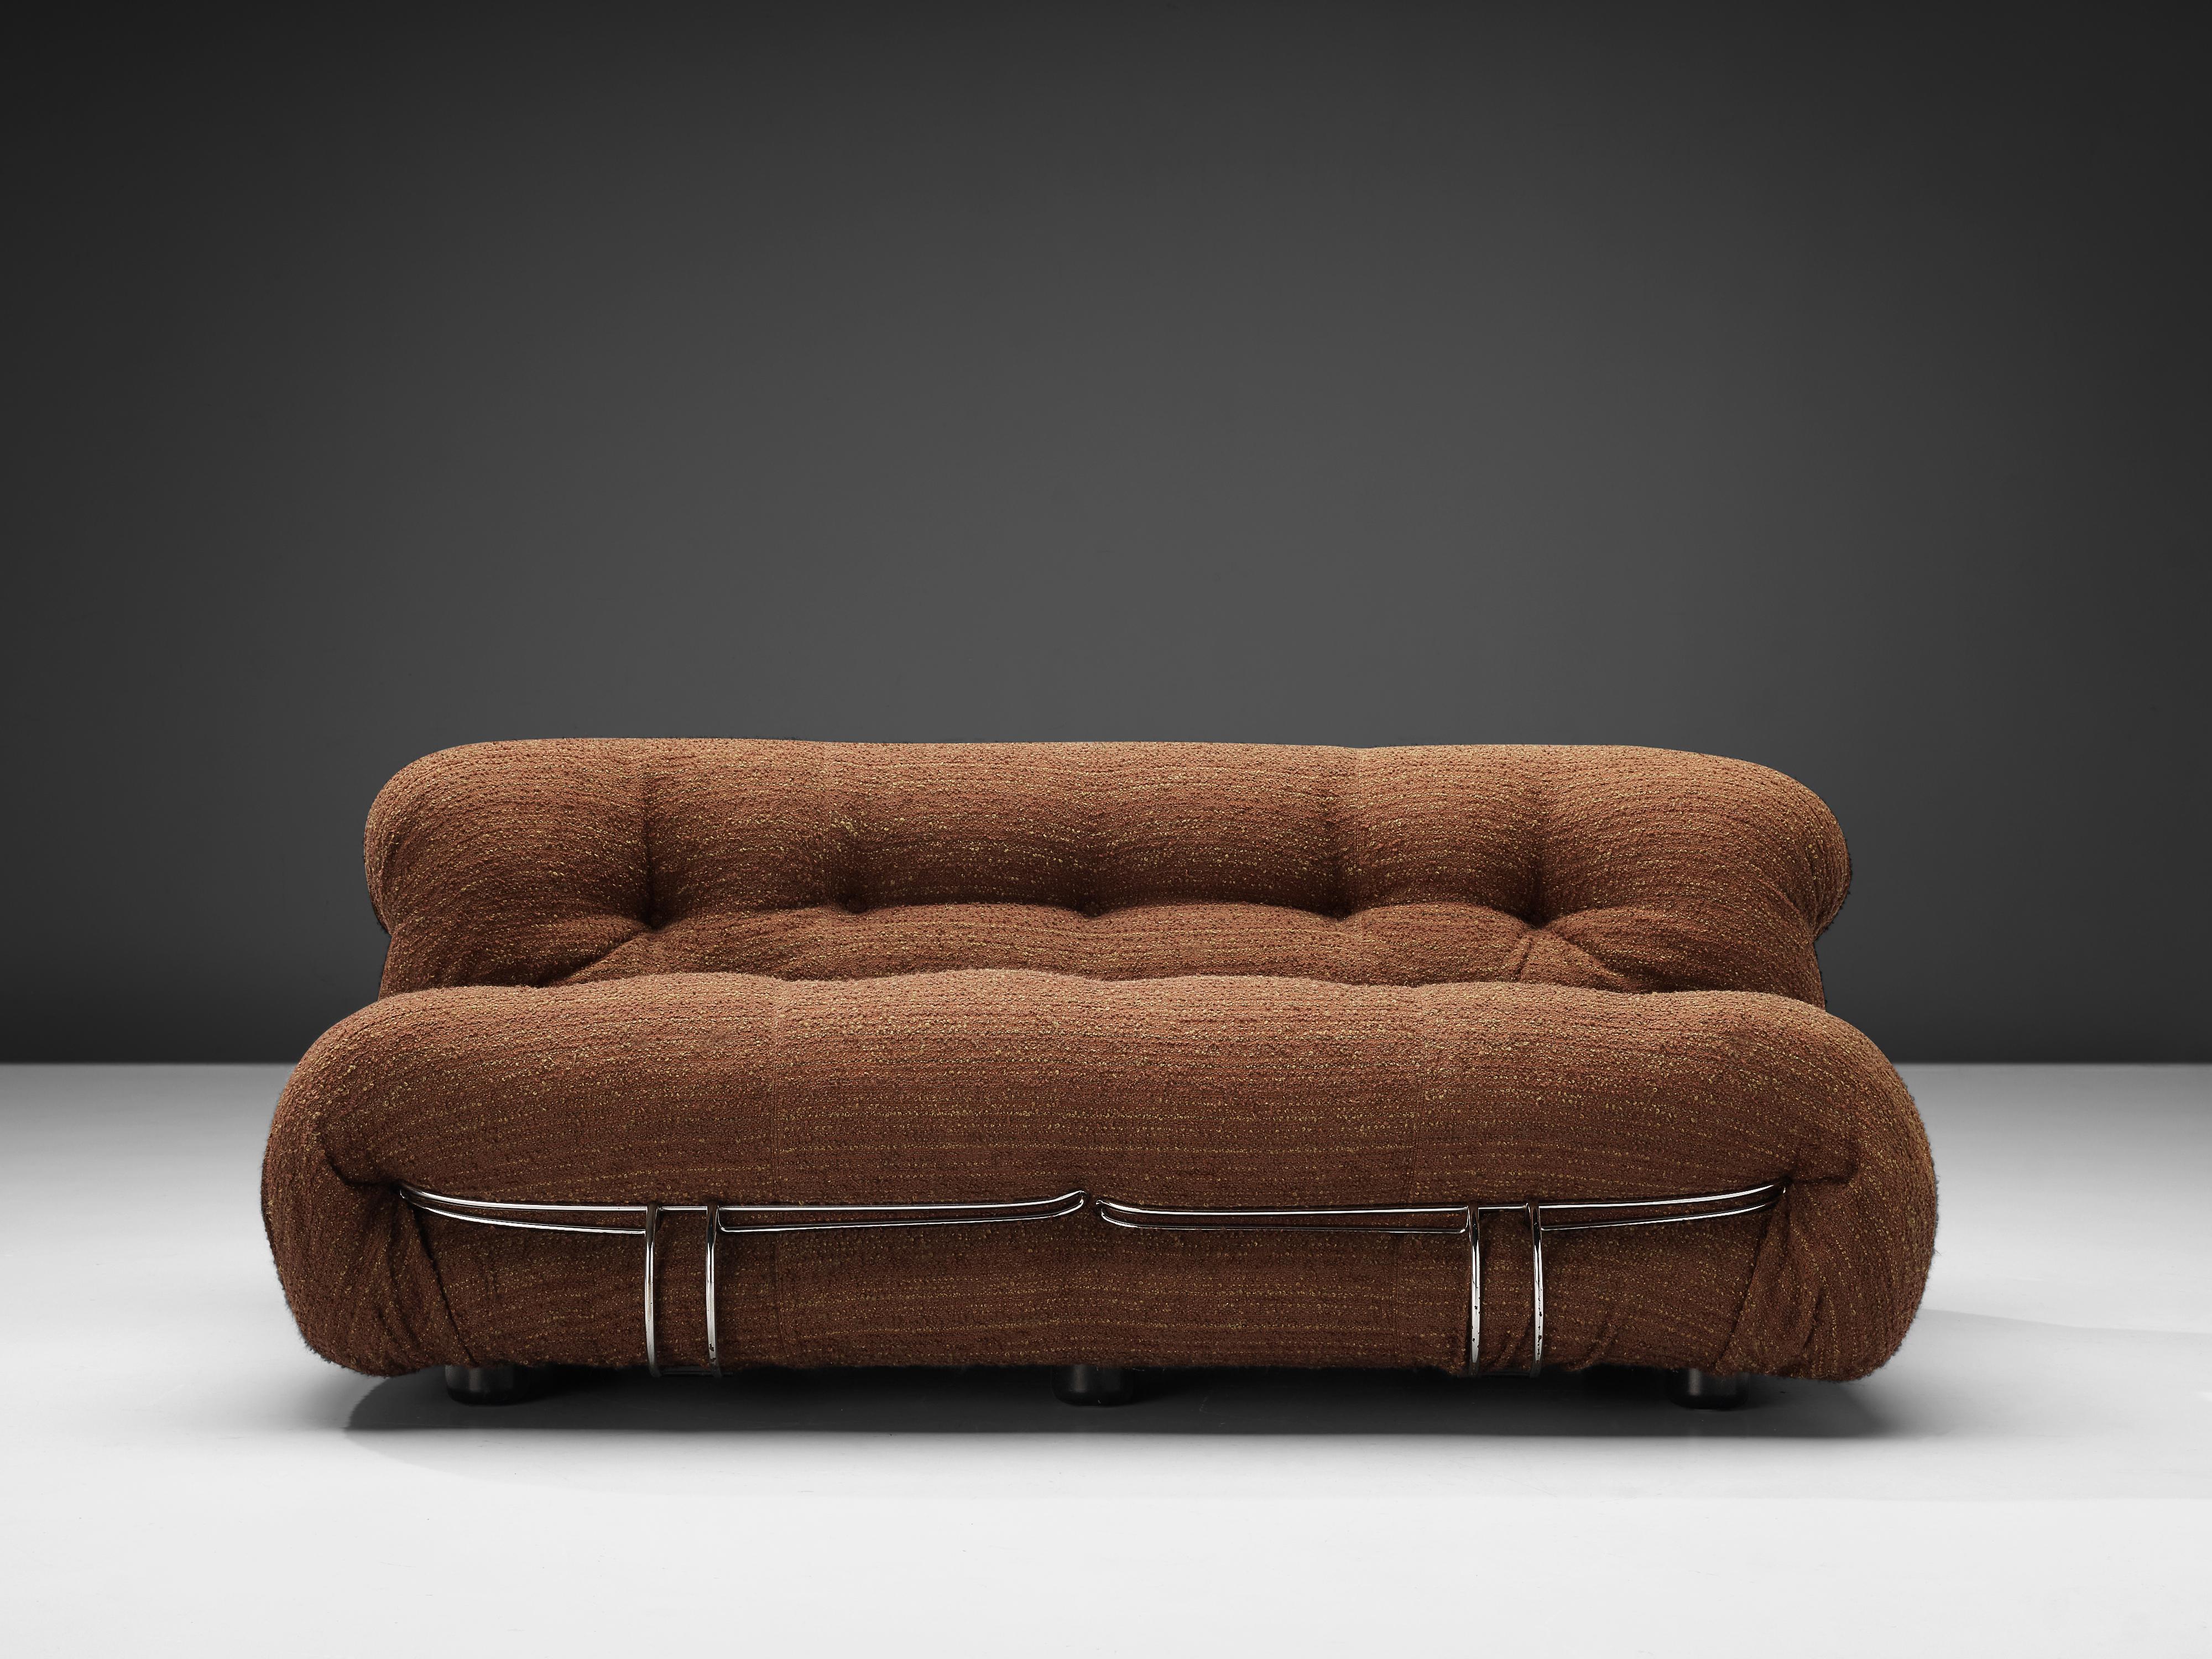 Afra & Tobia Scarpa for Cassina, 'Soriana' sofa, brown fabric, metal, Italy, 1969 

Iconic sofa by Italian designer couple Afra & Tobia Scarpa. The ‘Soriana’ proposes a model that institutionalizes the image of the informal sitting where everything